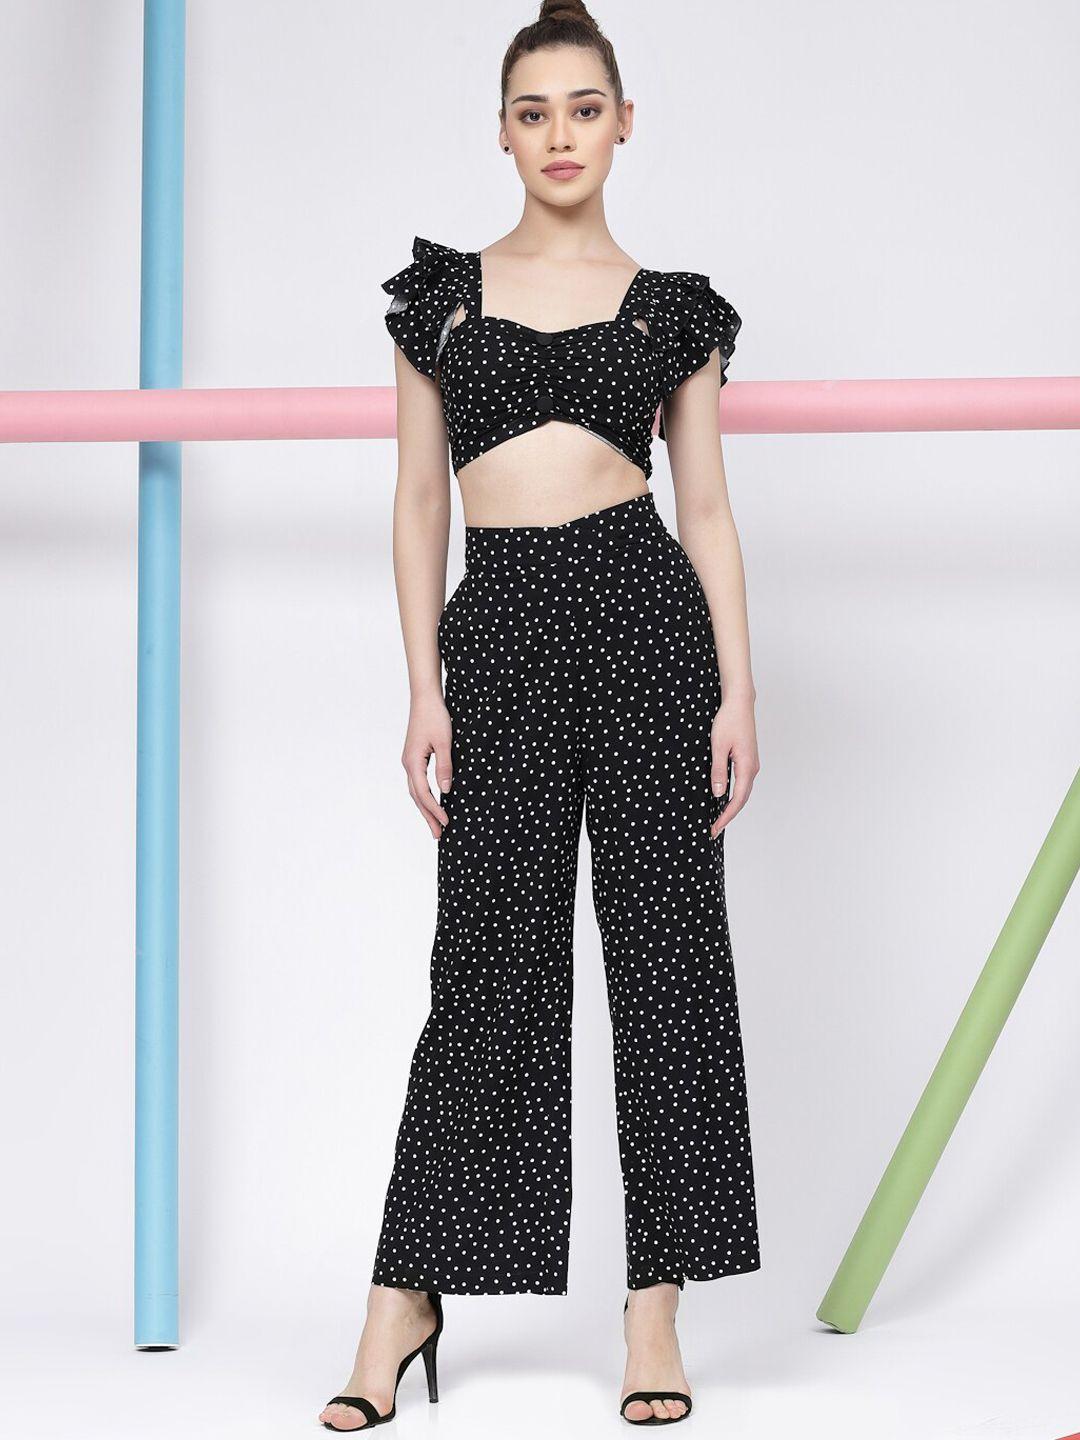 kassually polka dot printed crop top with trouser co-ords